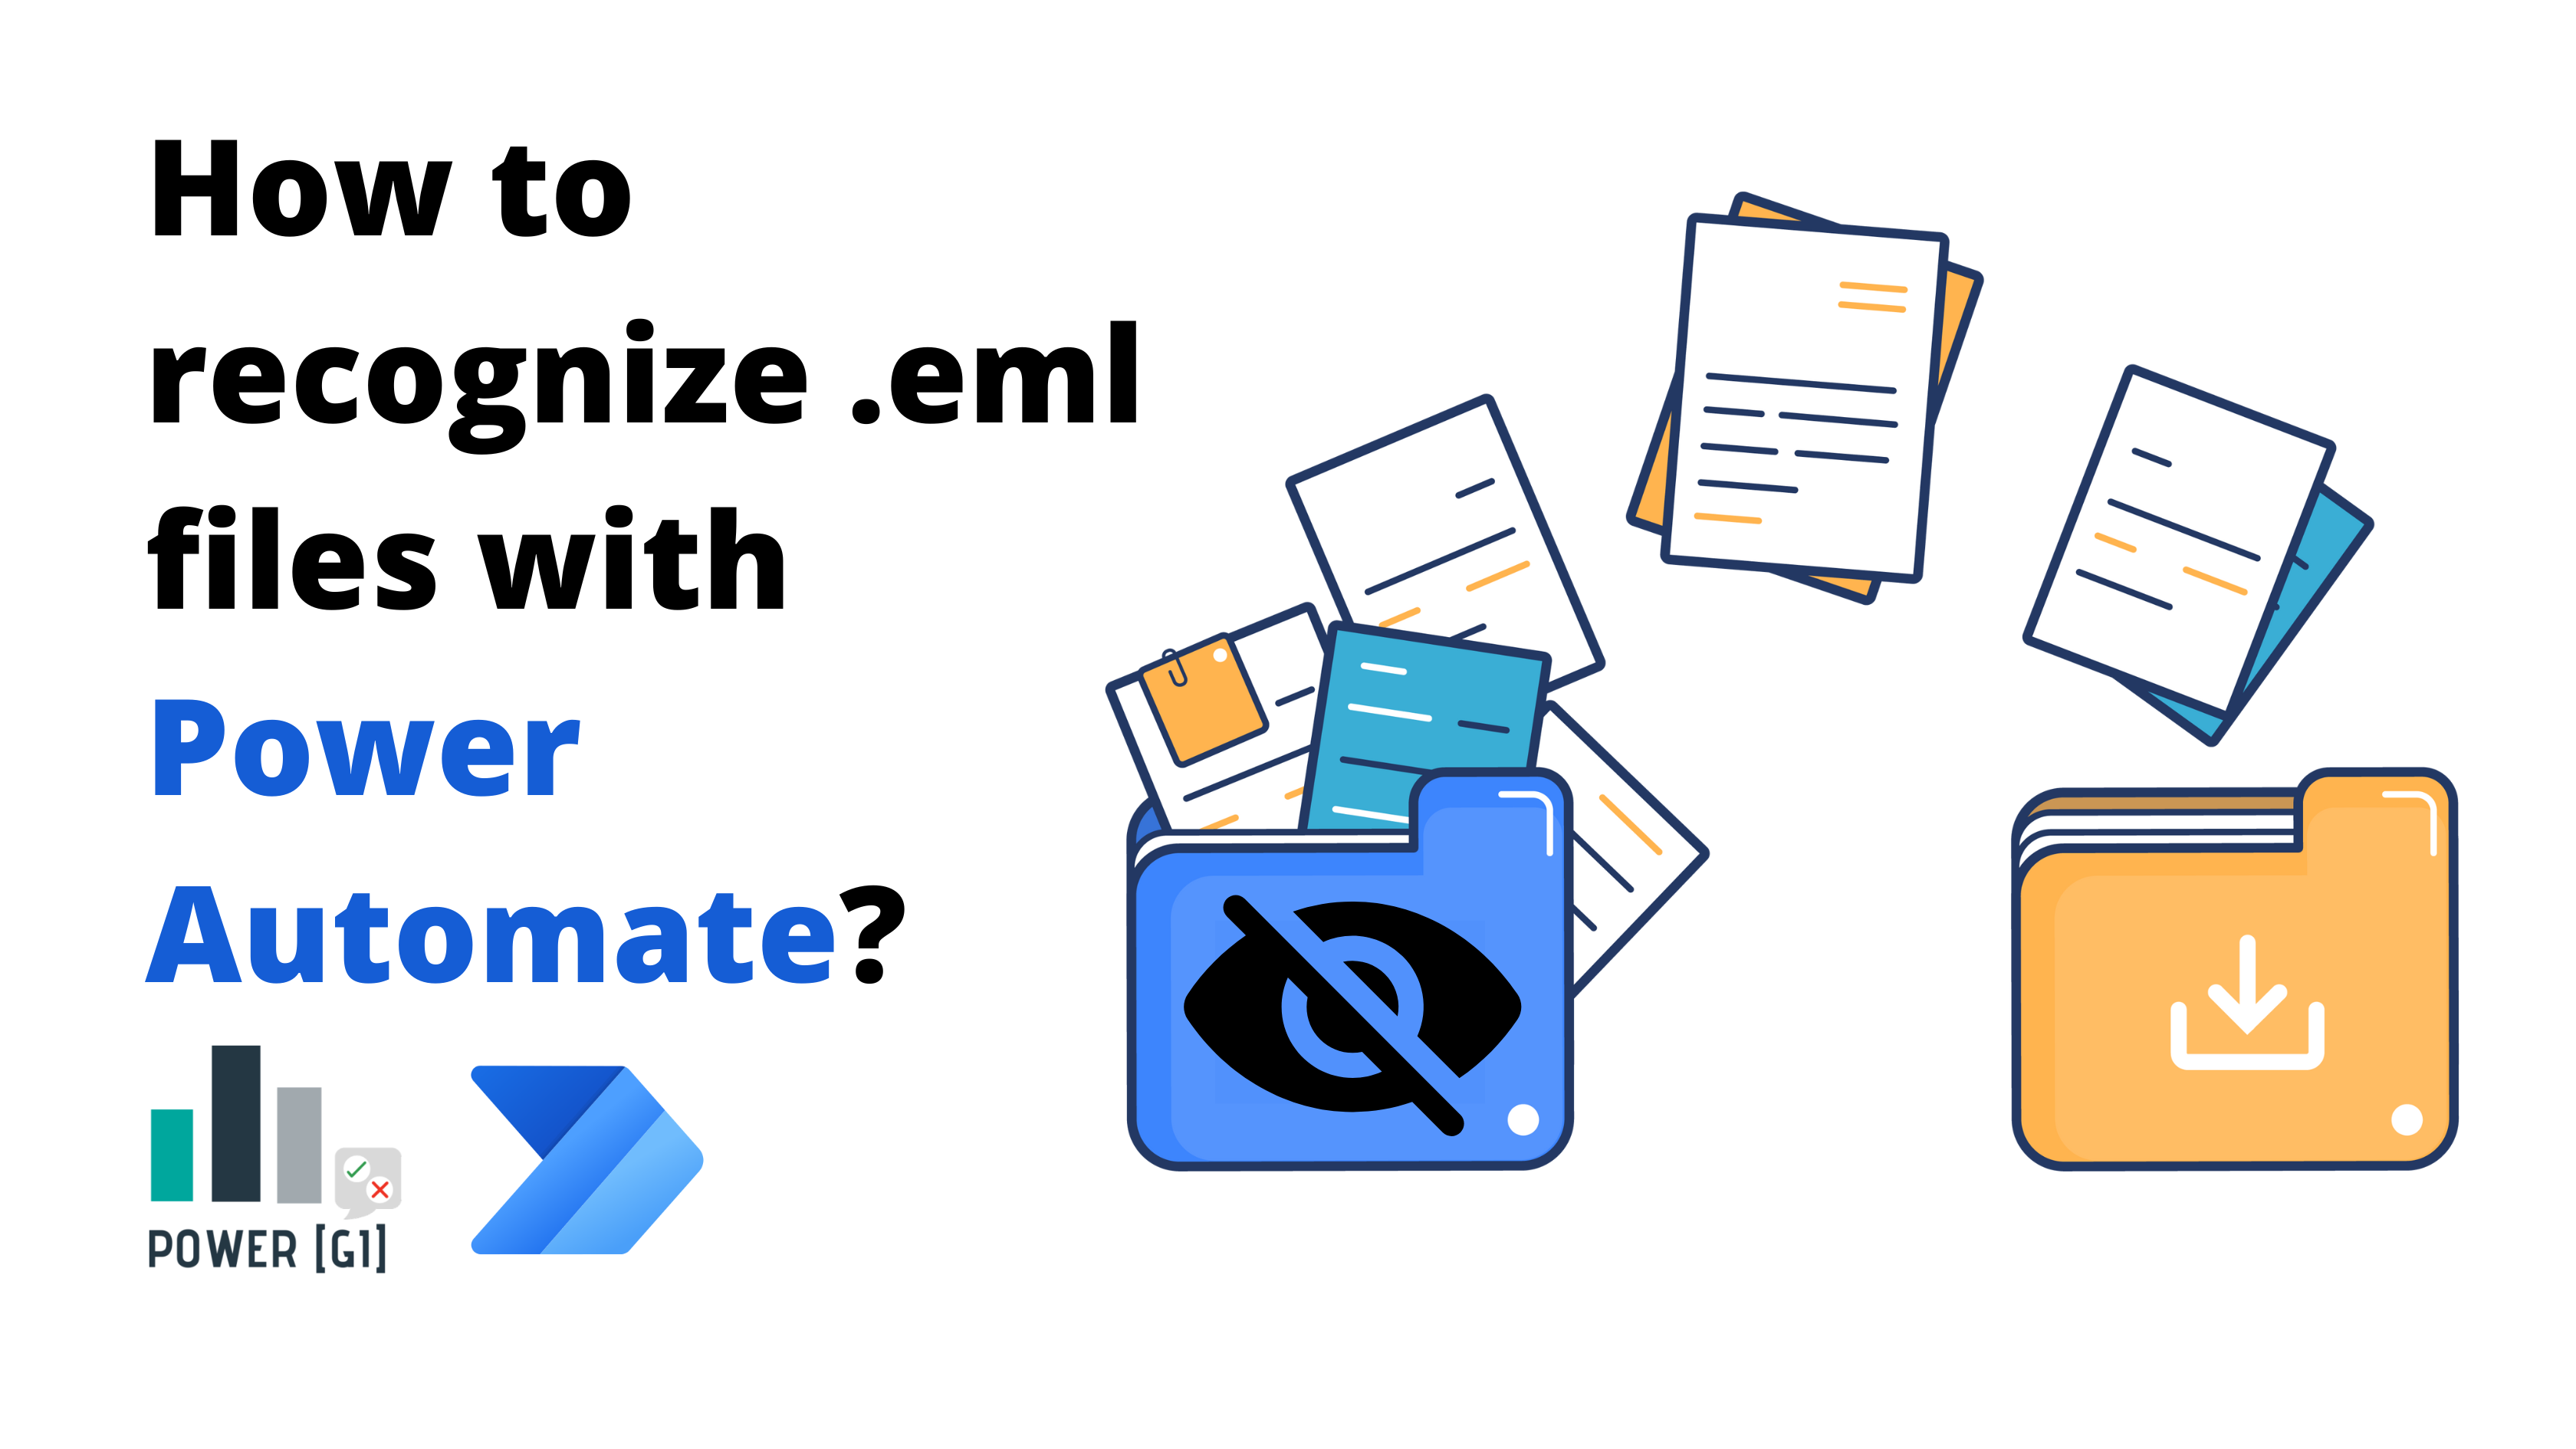 .eml files with Power Automate